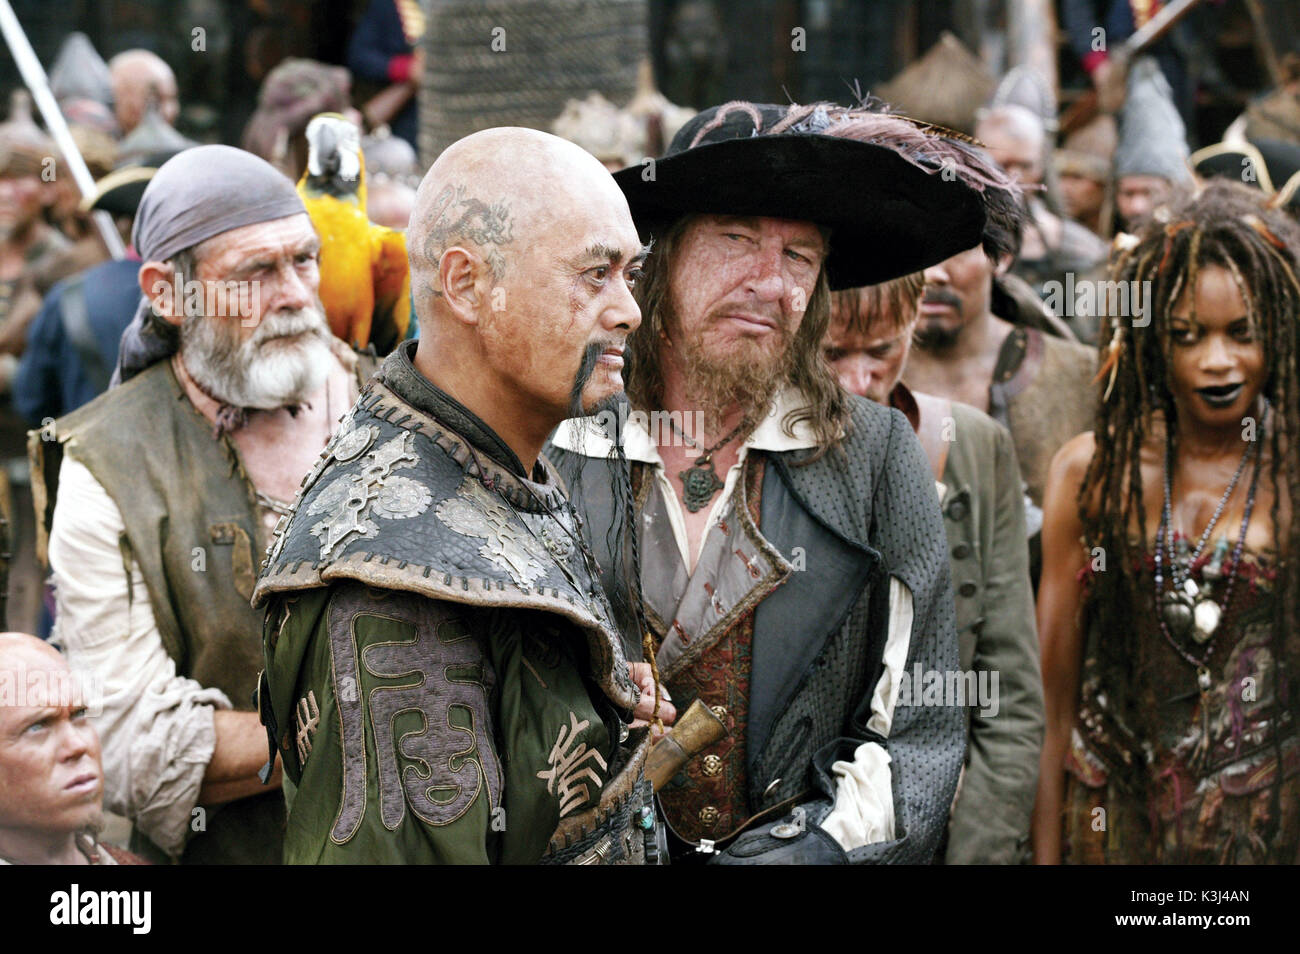 Pictured L-R: Cotton (DAVID BAILIE), Chinese Pirate Sao Feng (CHOW  YUN-FAT), Captain Barbossa (GEOFFREY RUSH), and Tia Dalma (NAOMIE HARRIS)  in a scene from PIRATES OF THE CARIBBEAN: AT WORLD'S END, directed